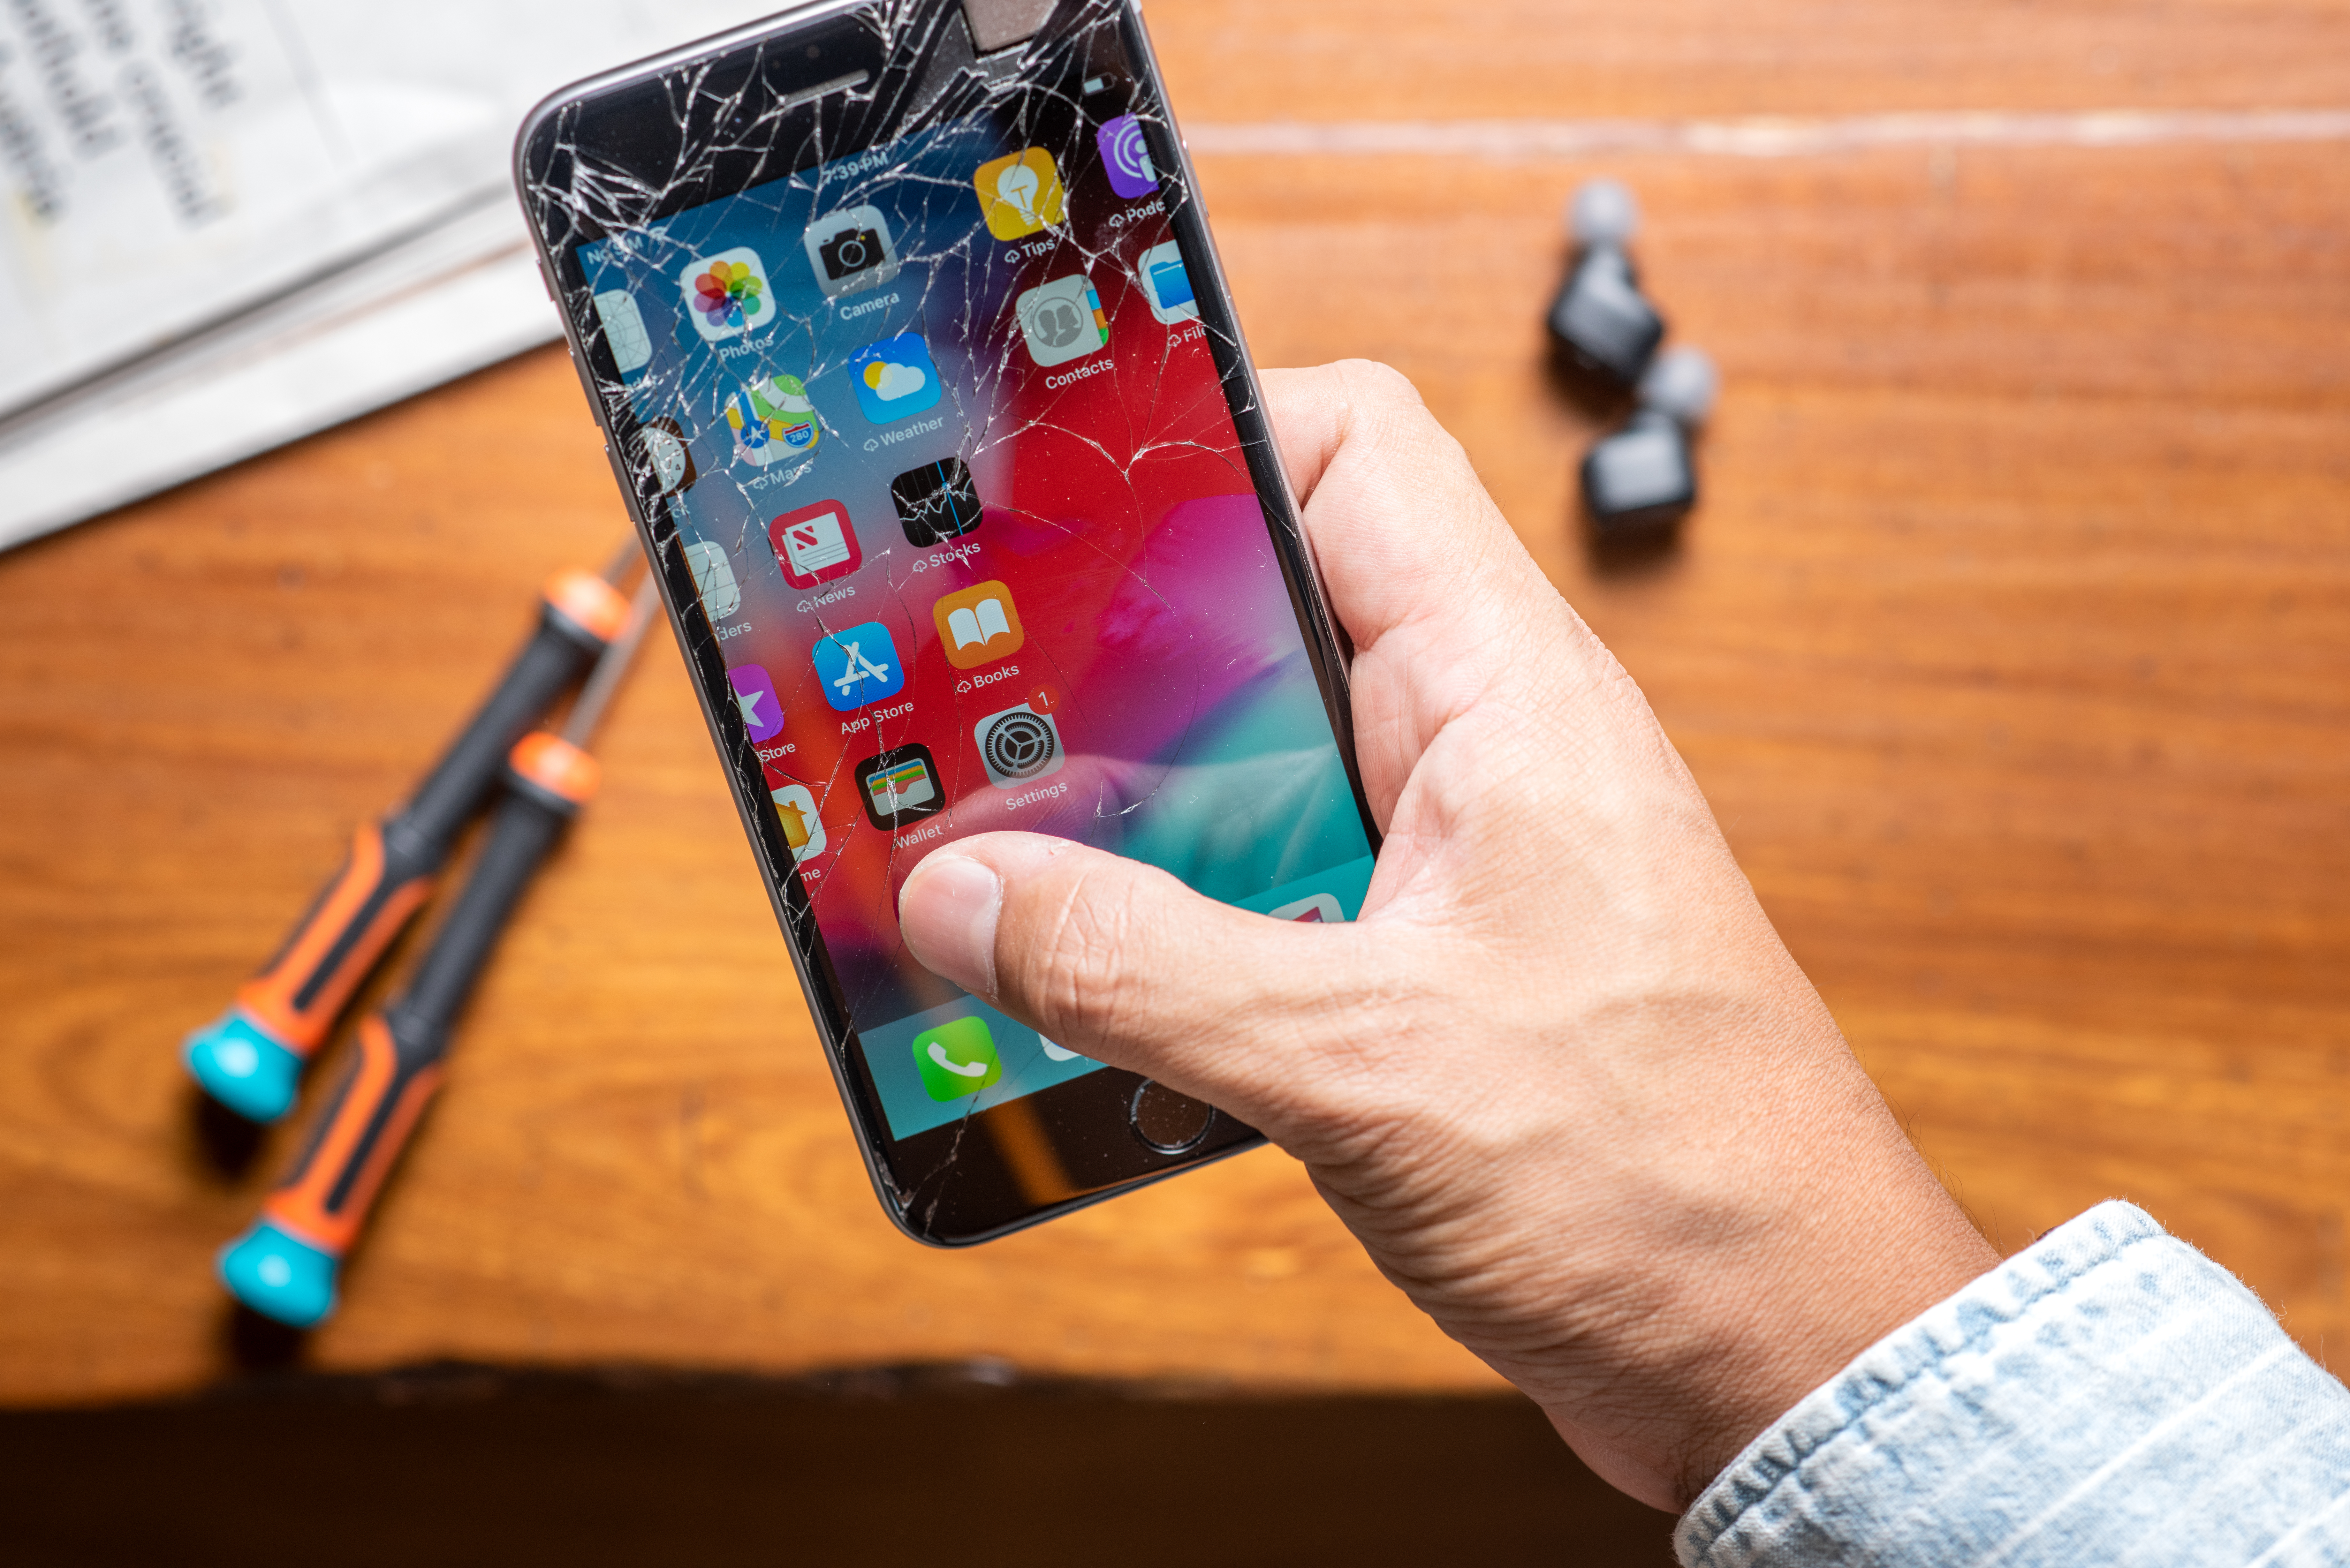 What to do if your iPhone screen is cracked or broken